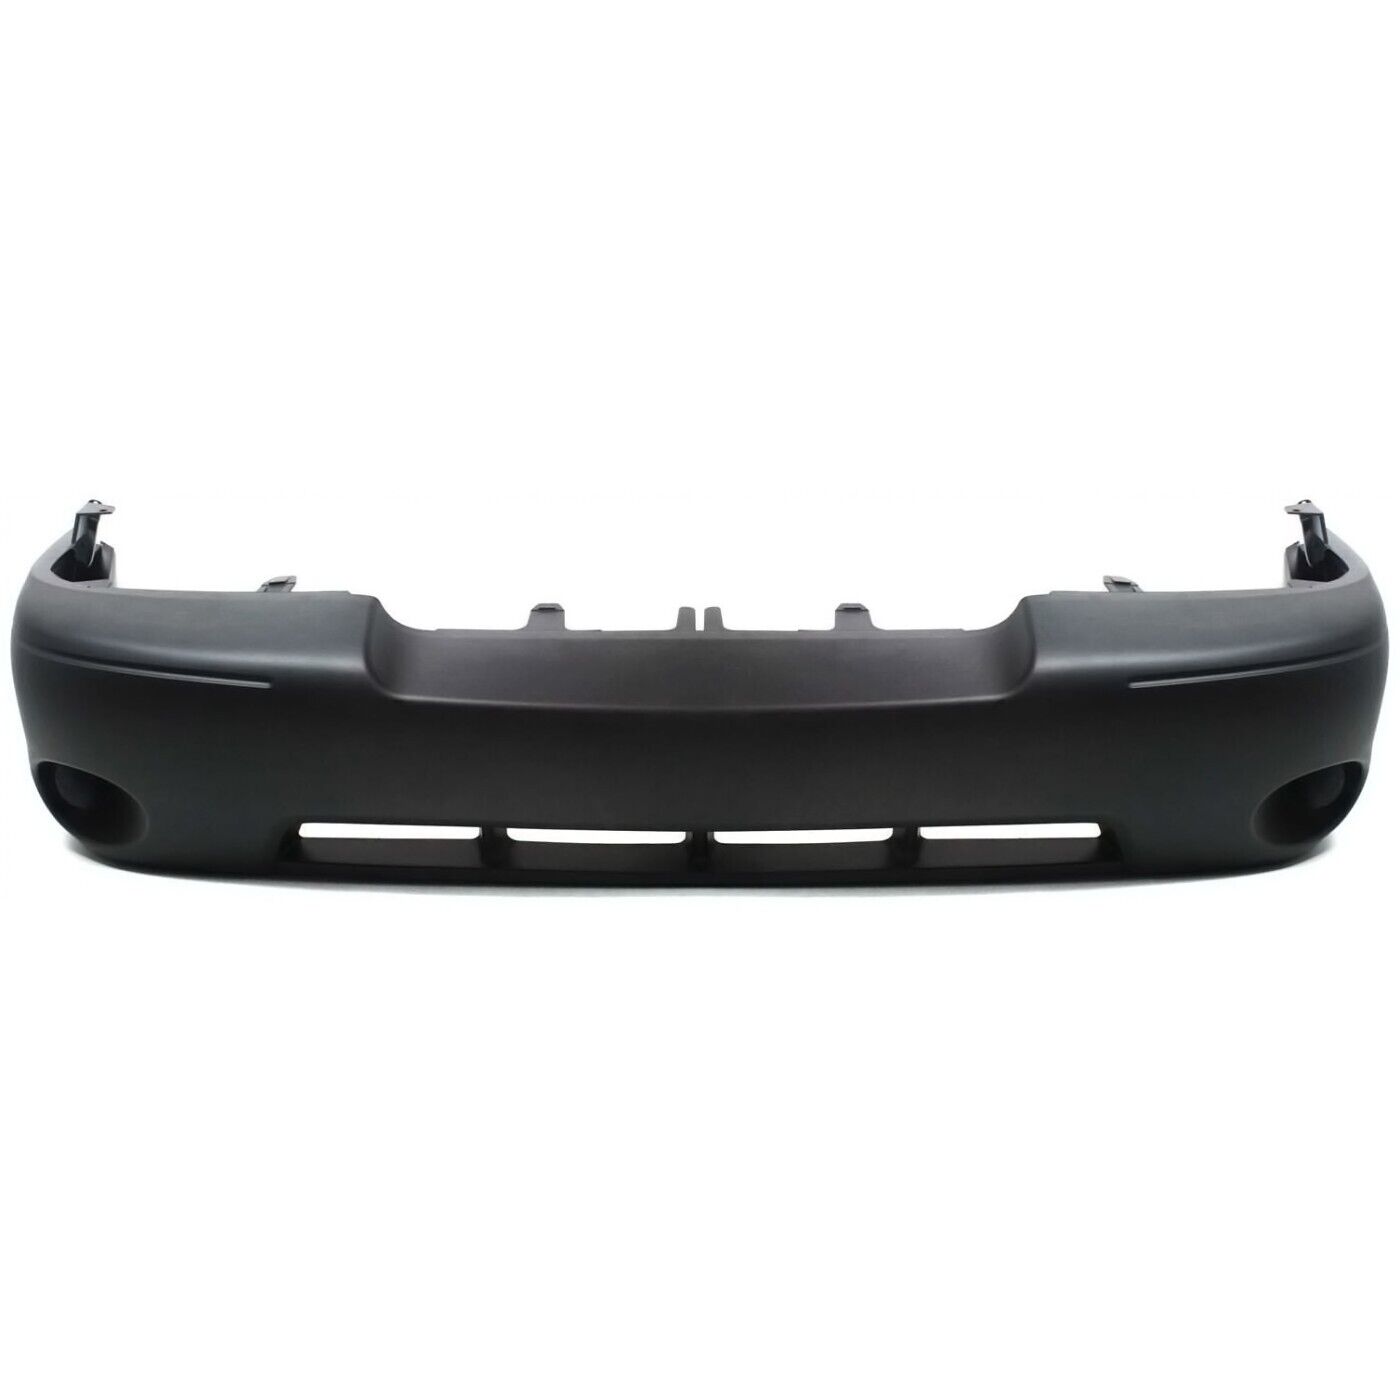 Bumper Cover For 2003-2004 Mercury Marauder 4.6L 8Cyl Engine Front Primed